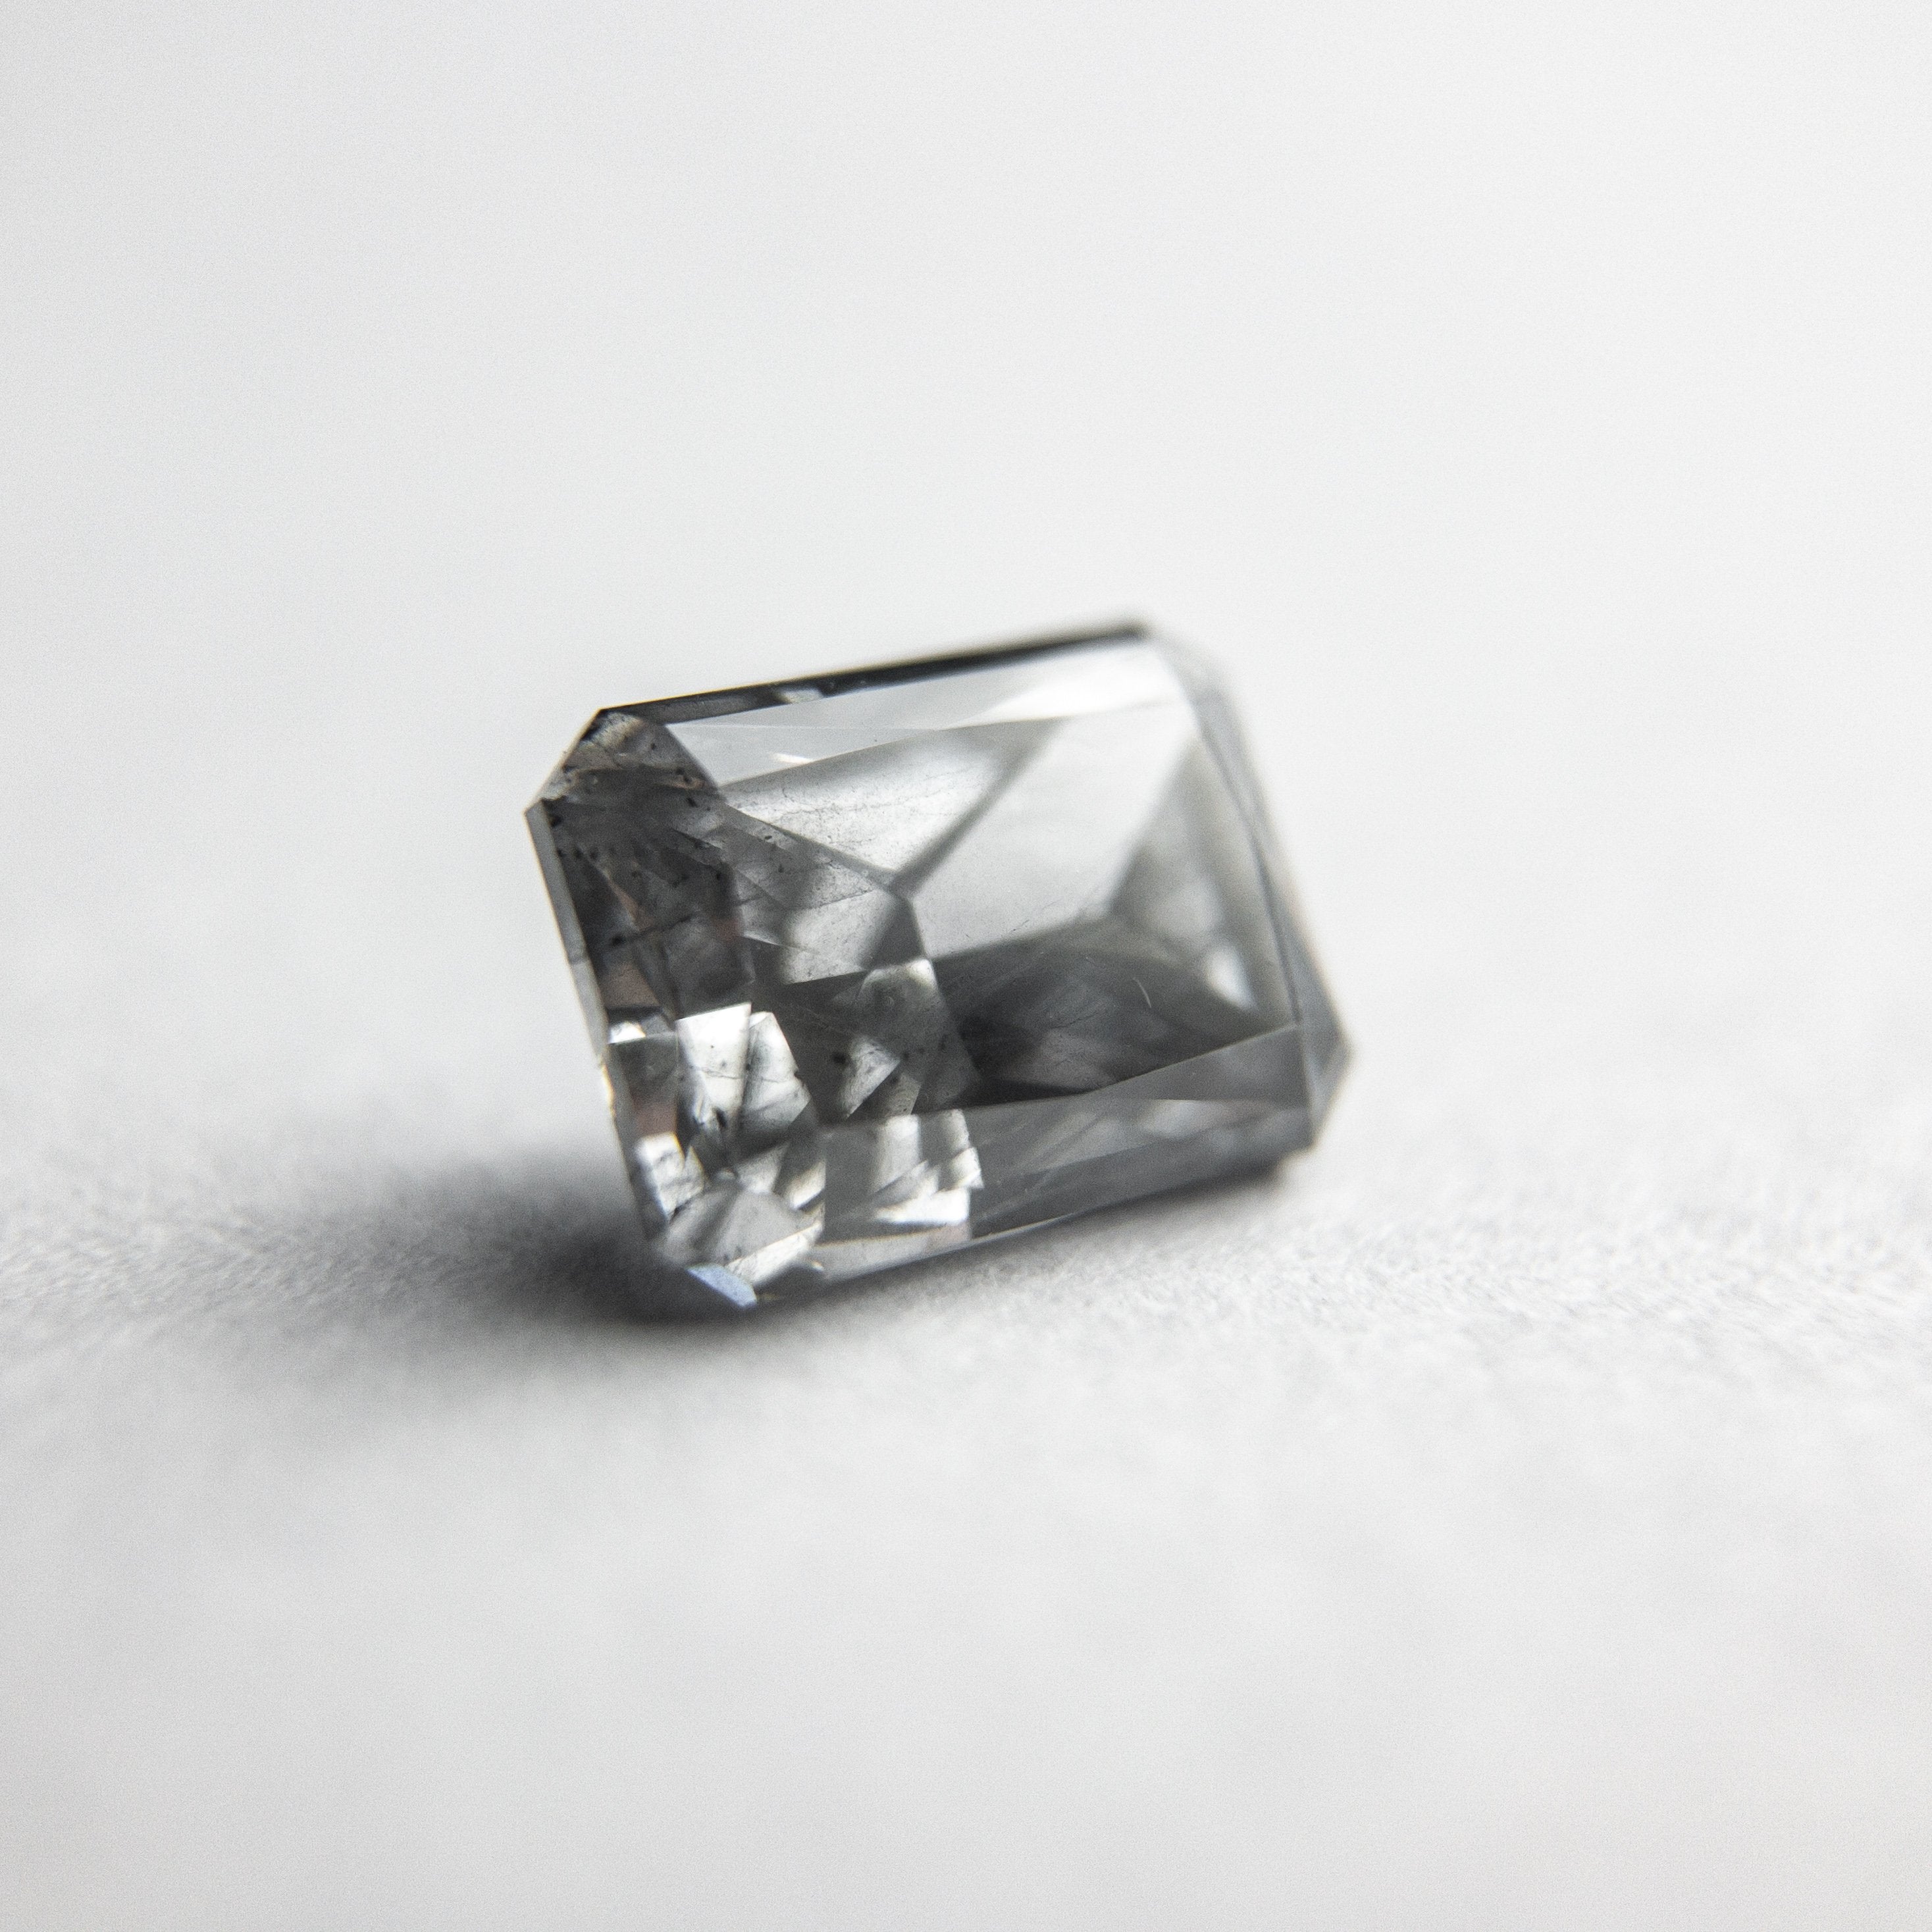 0.81ct 6.09x4.47x3.09mm GIA Fancy Grey Radiant Cut 18144-01 HOLD 06.2.20 D772